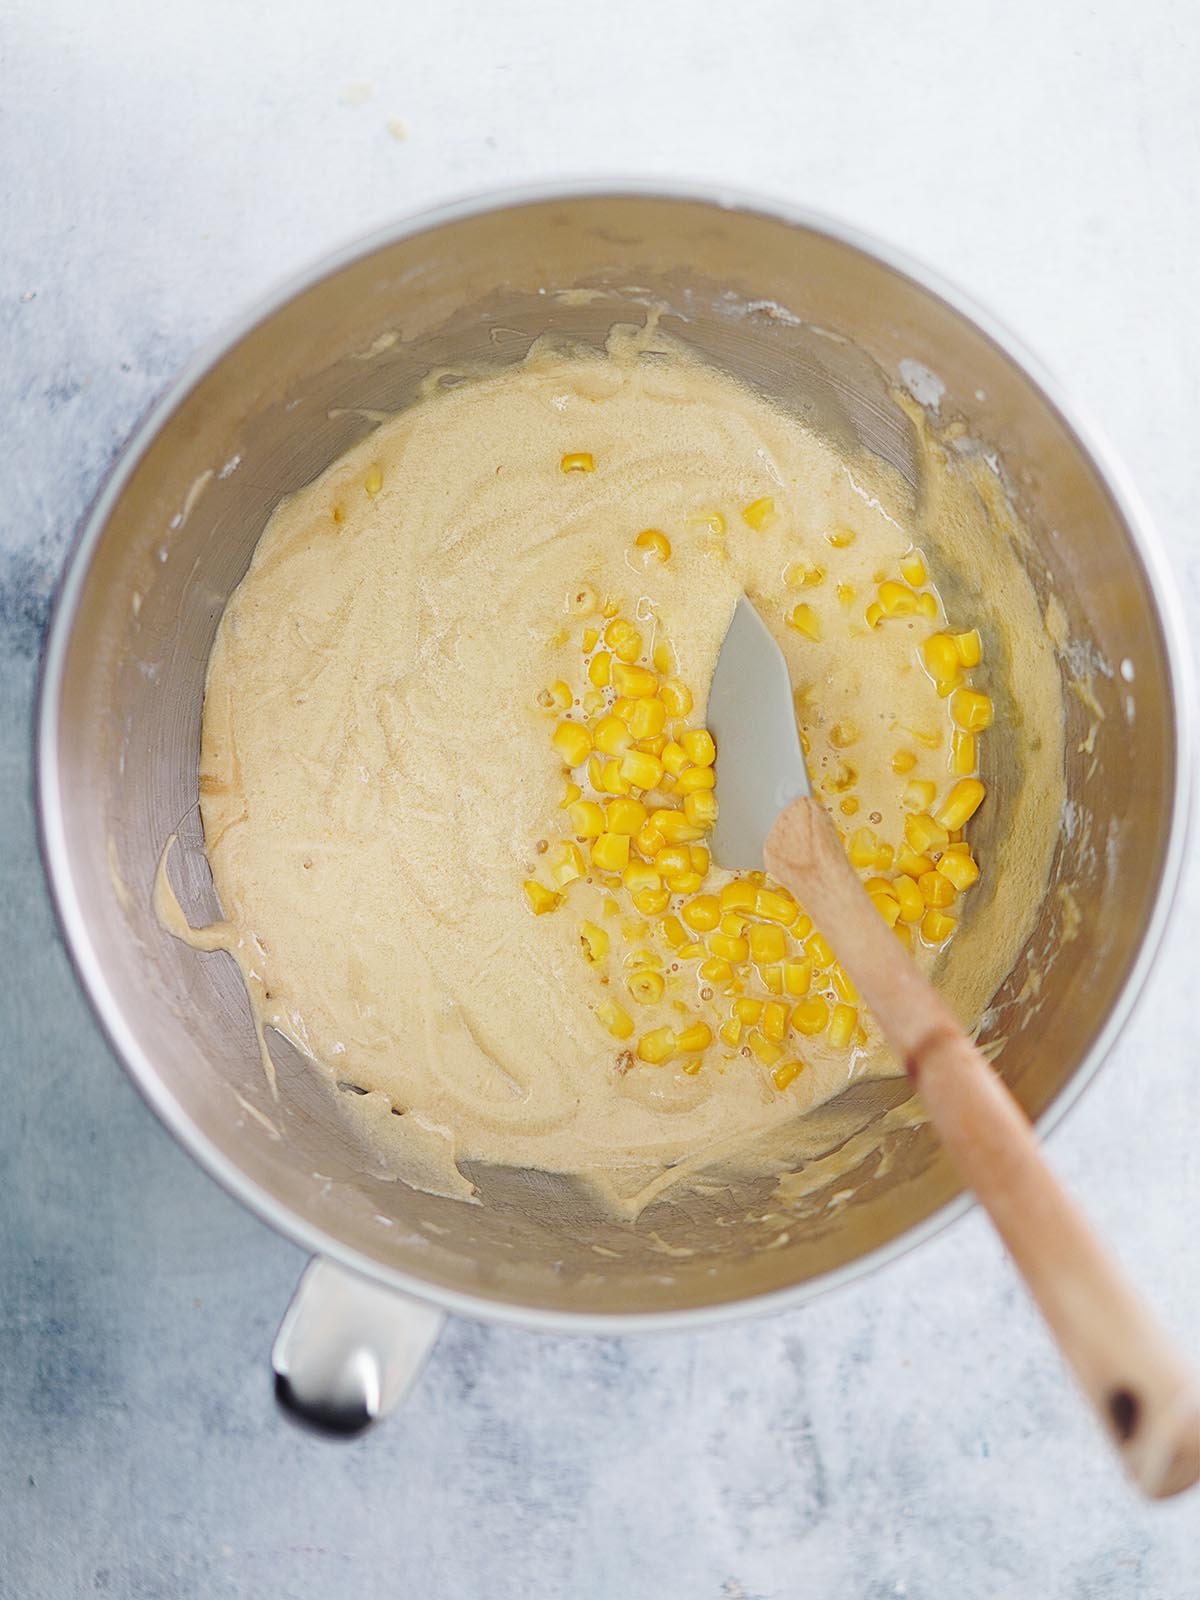 A mixing bowl with cake batter and corn kernels plus a spatula.